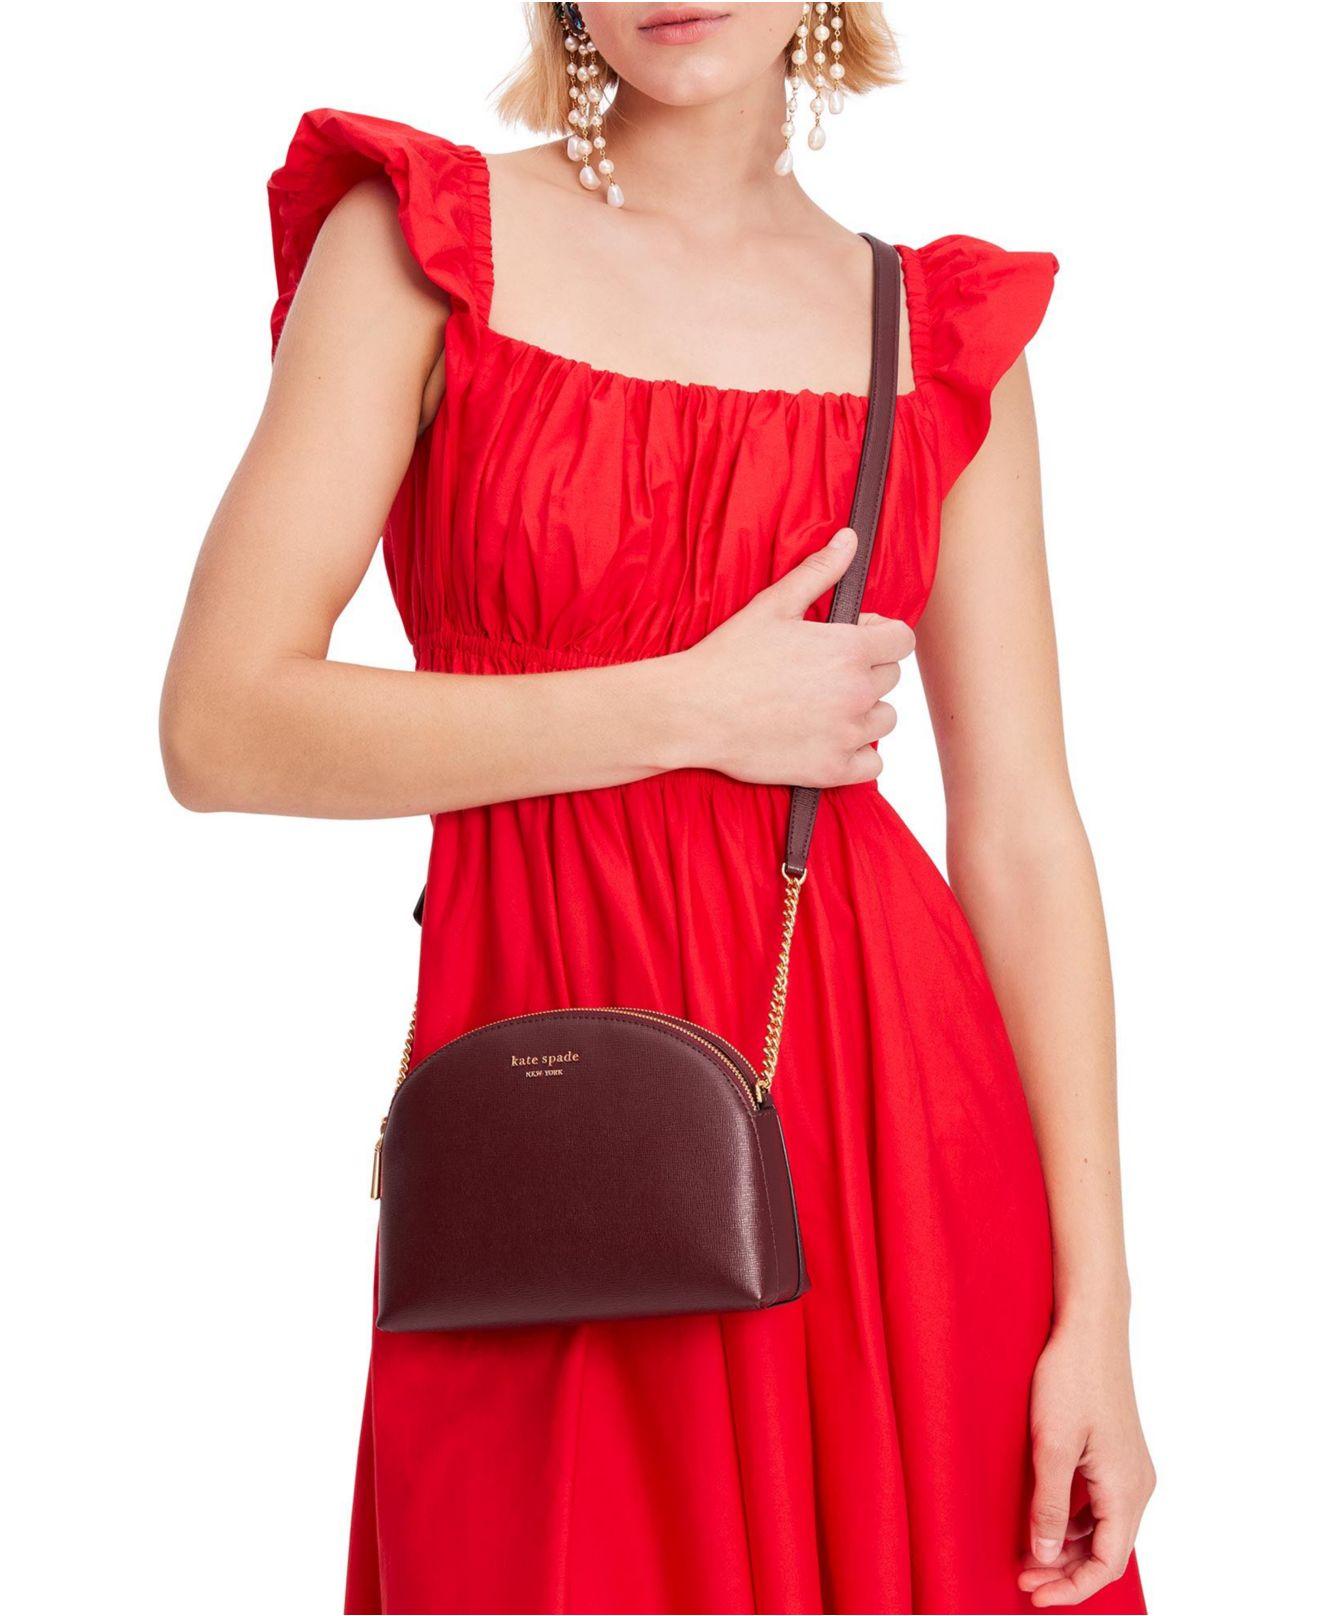 Kate Spade Morgan Saffiano Leather Dome Crossbody in Red